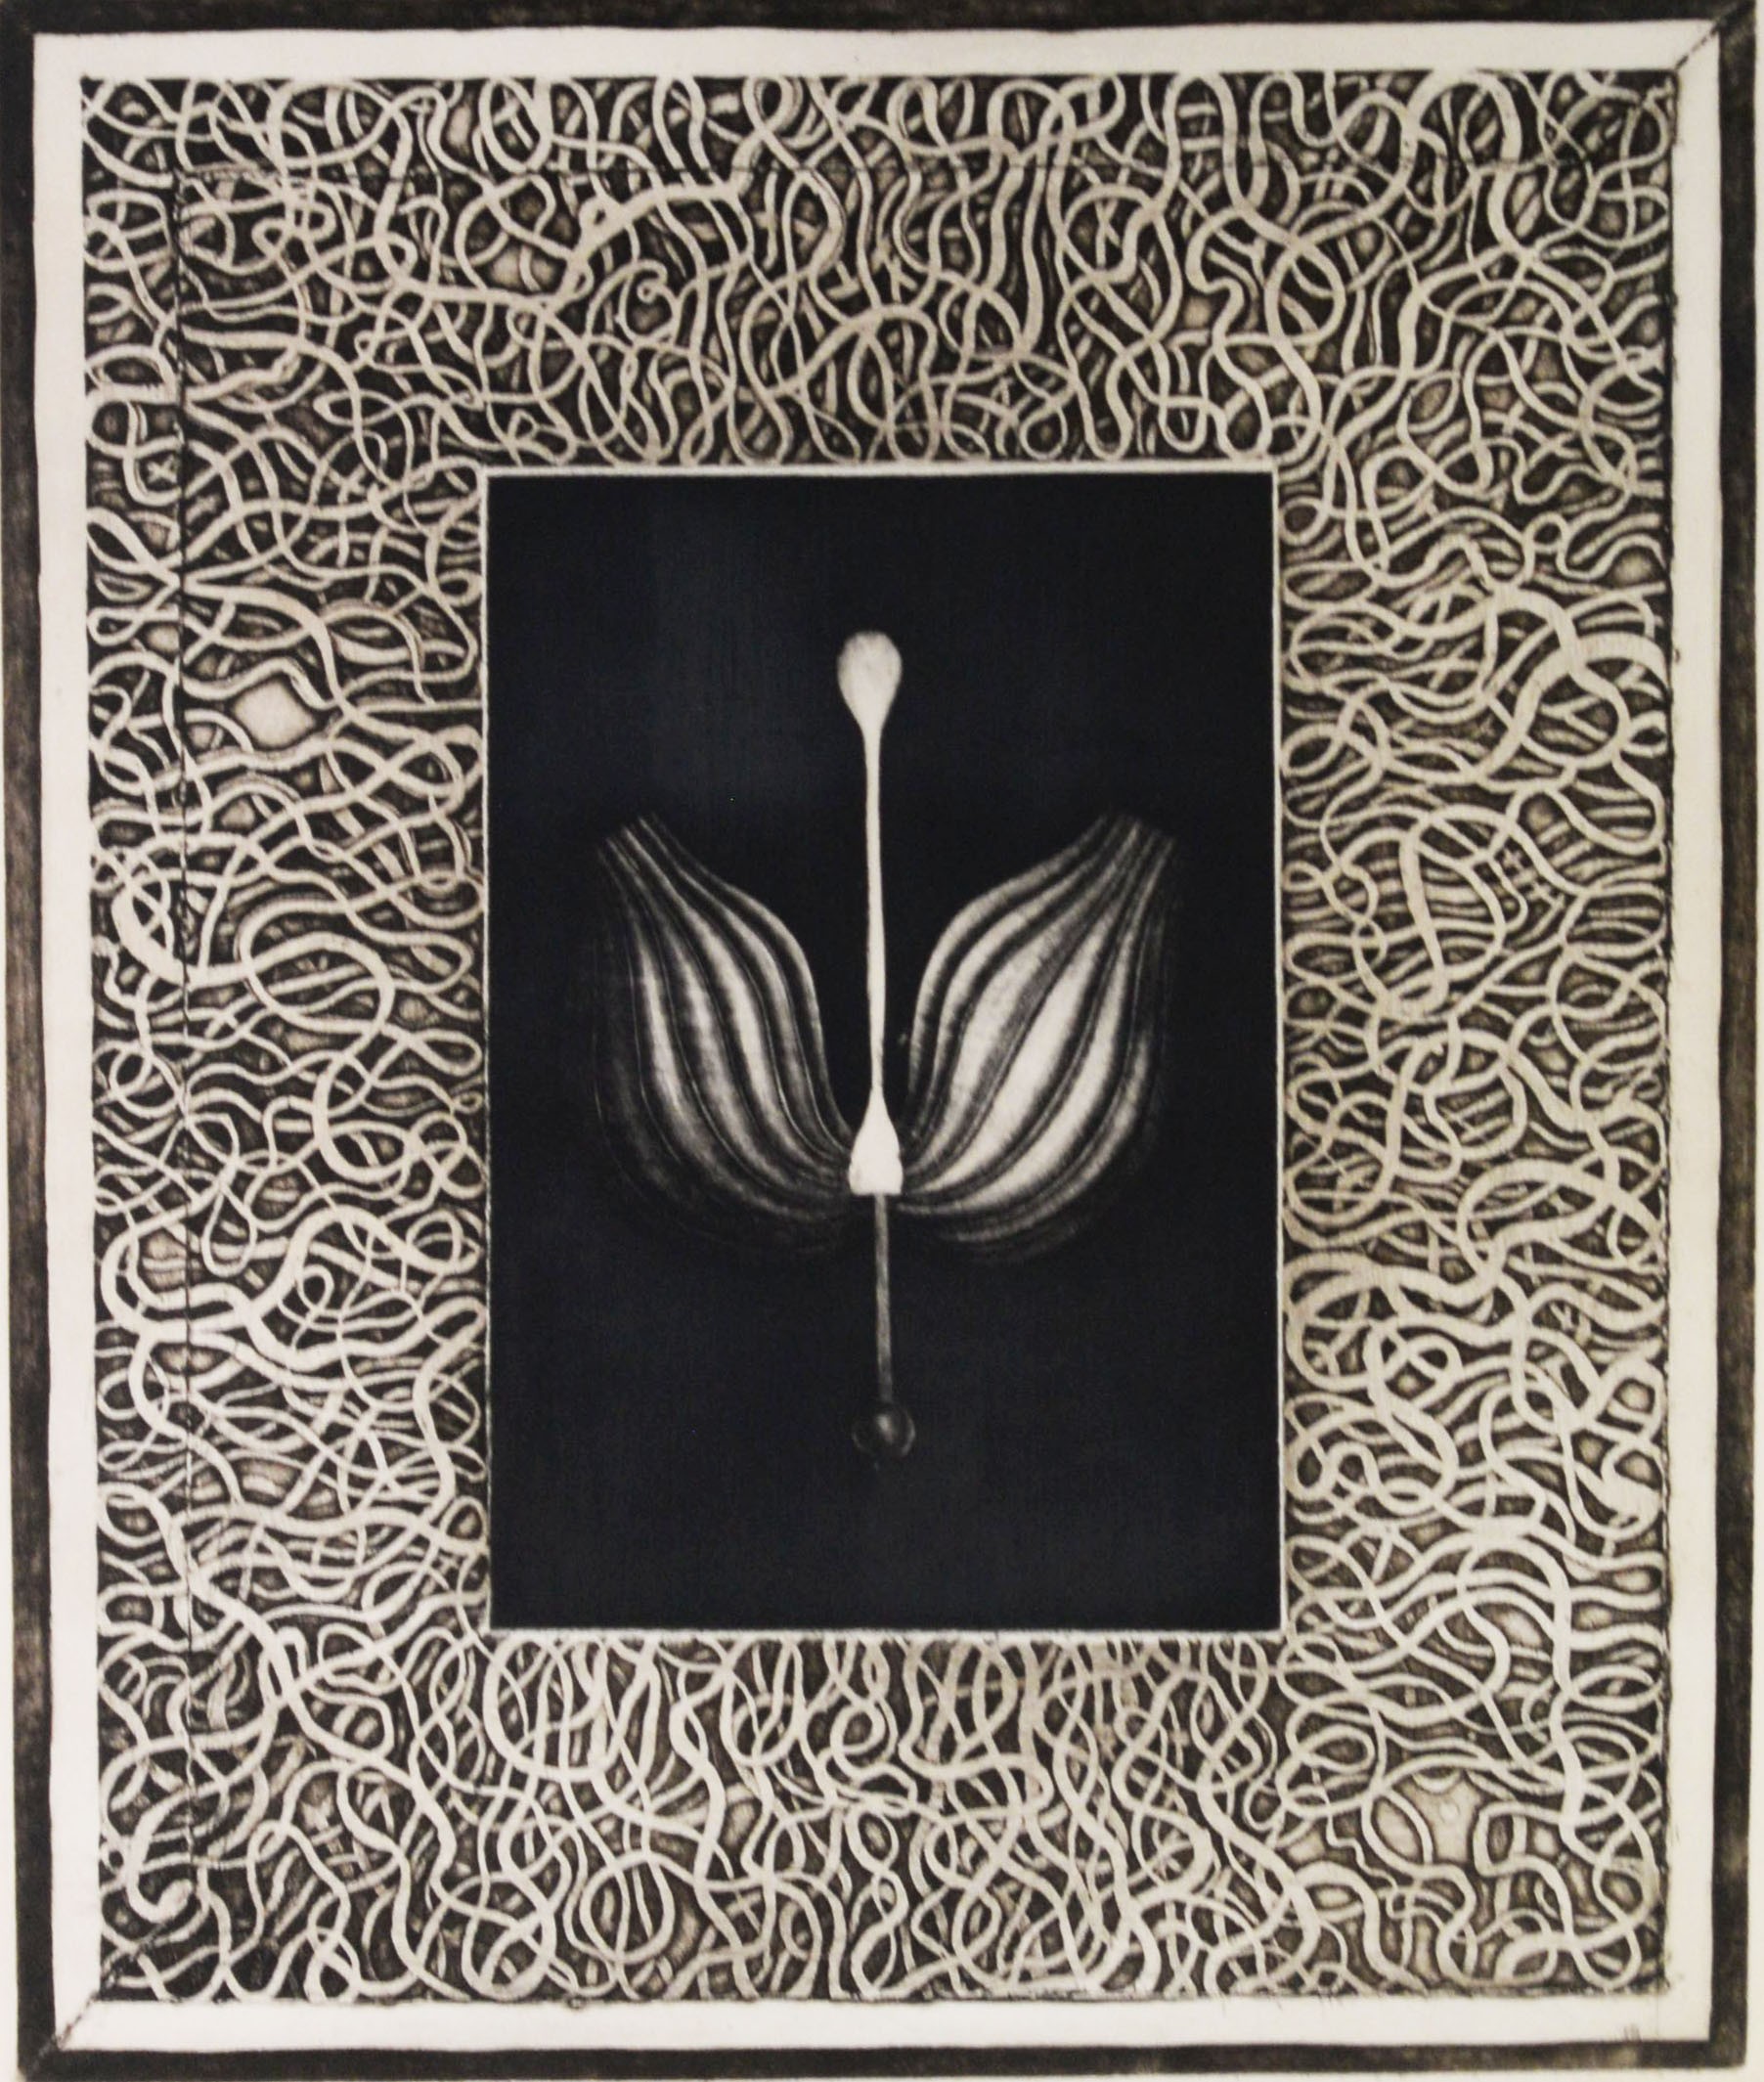 RADOVAN KRAGULY (b.1935) ARTIST SIGNED LIMITED EDITION BLACK AND WHITE PRINT ‘Flower’ (9/75) 18” x - Image 2 of 4